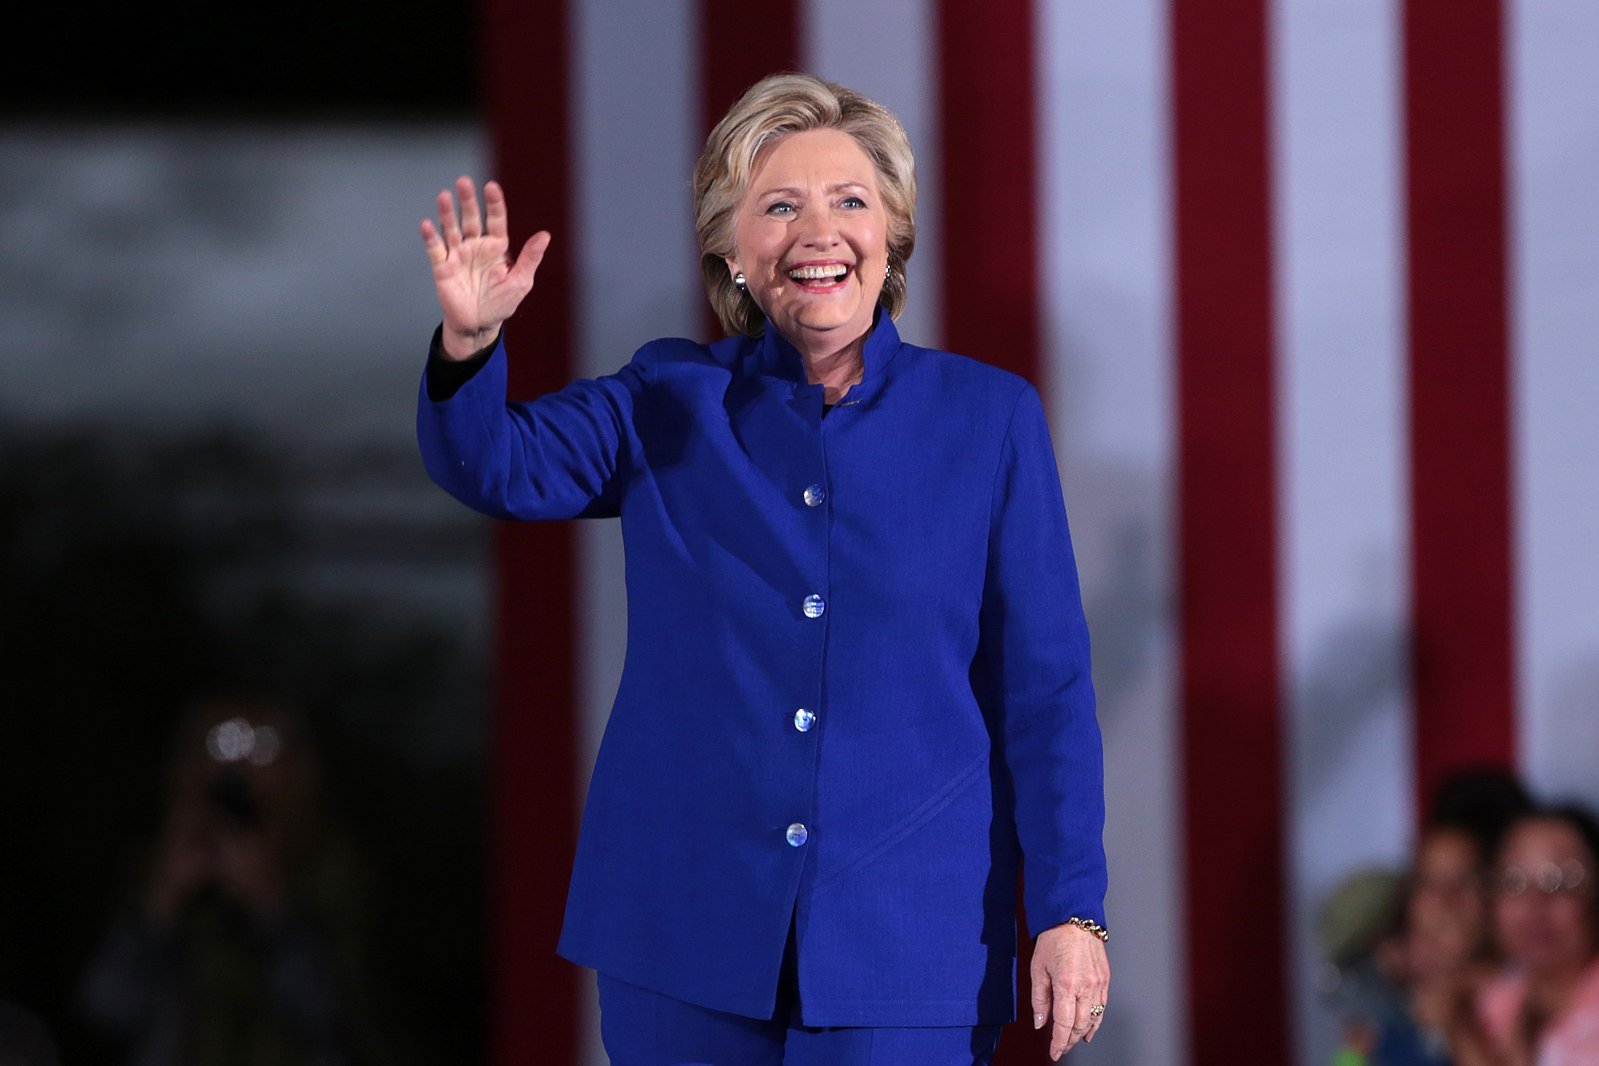 Hillary Clinton in a blue suit waving